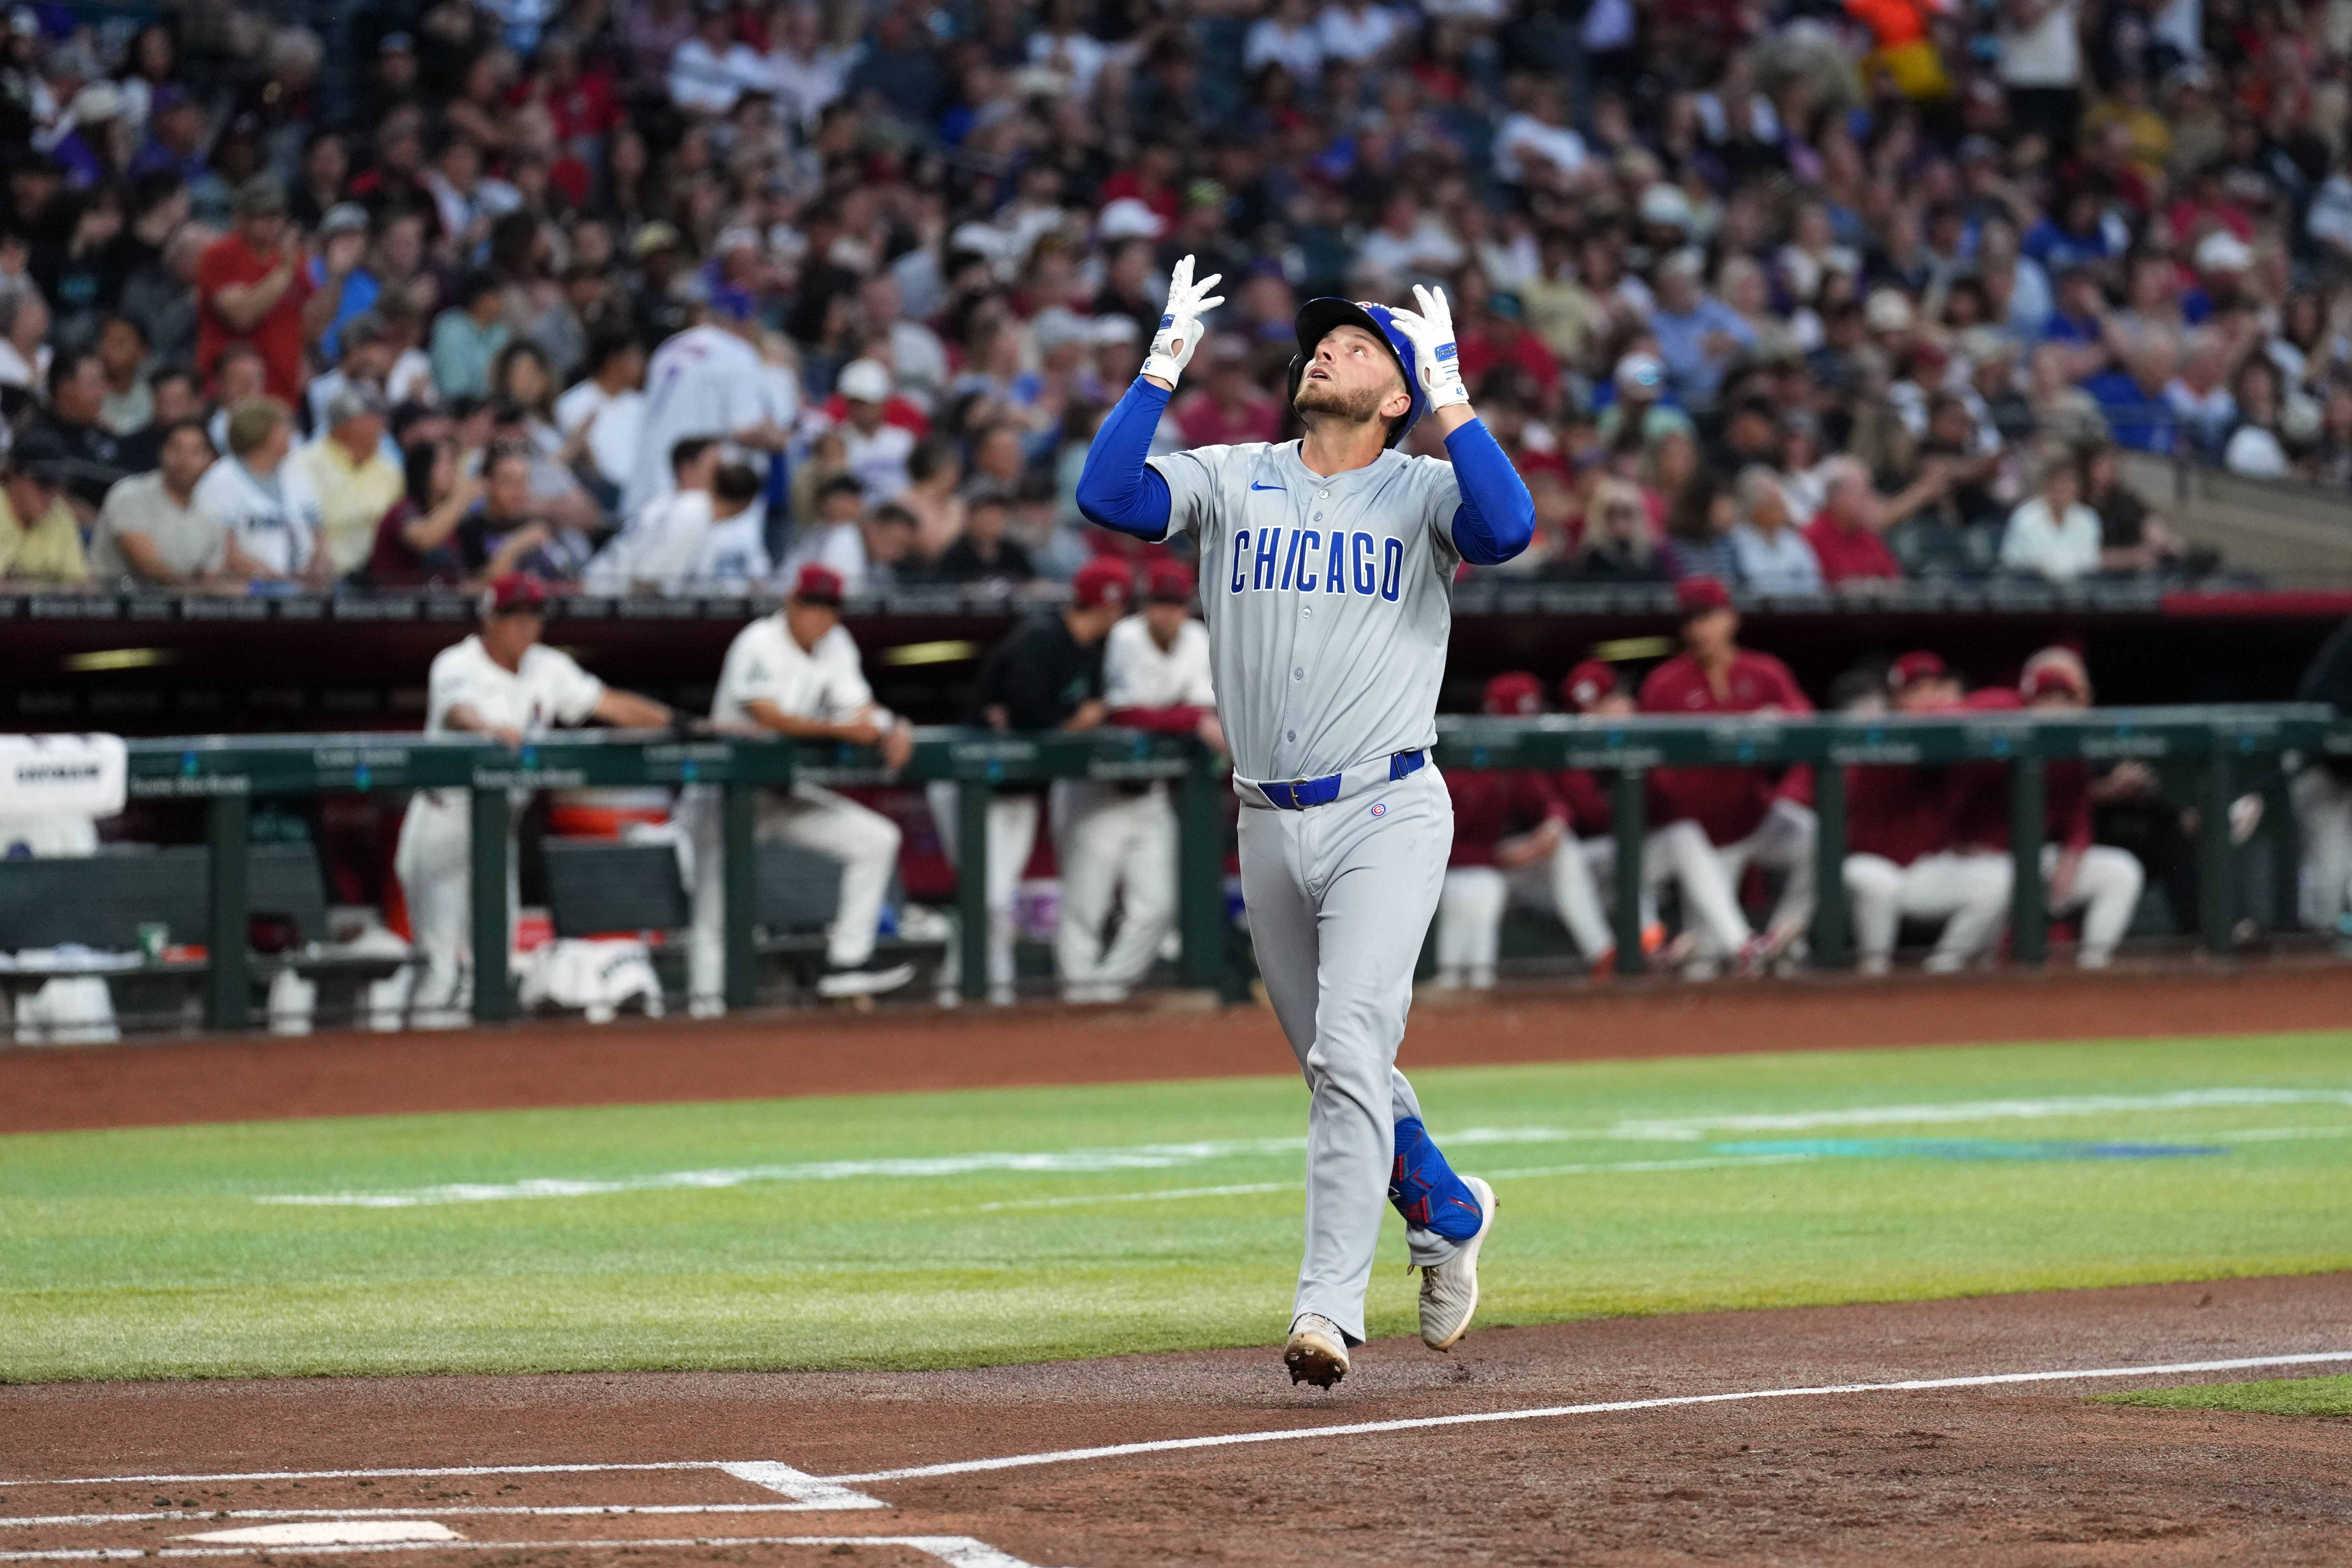 Cubs Rookie Michael Busch Ties Franchise Record with Homers in Five Consecutive Games